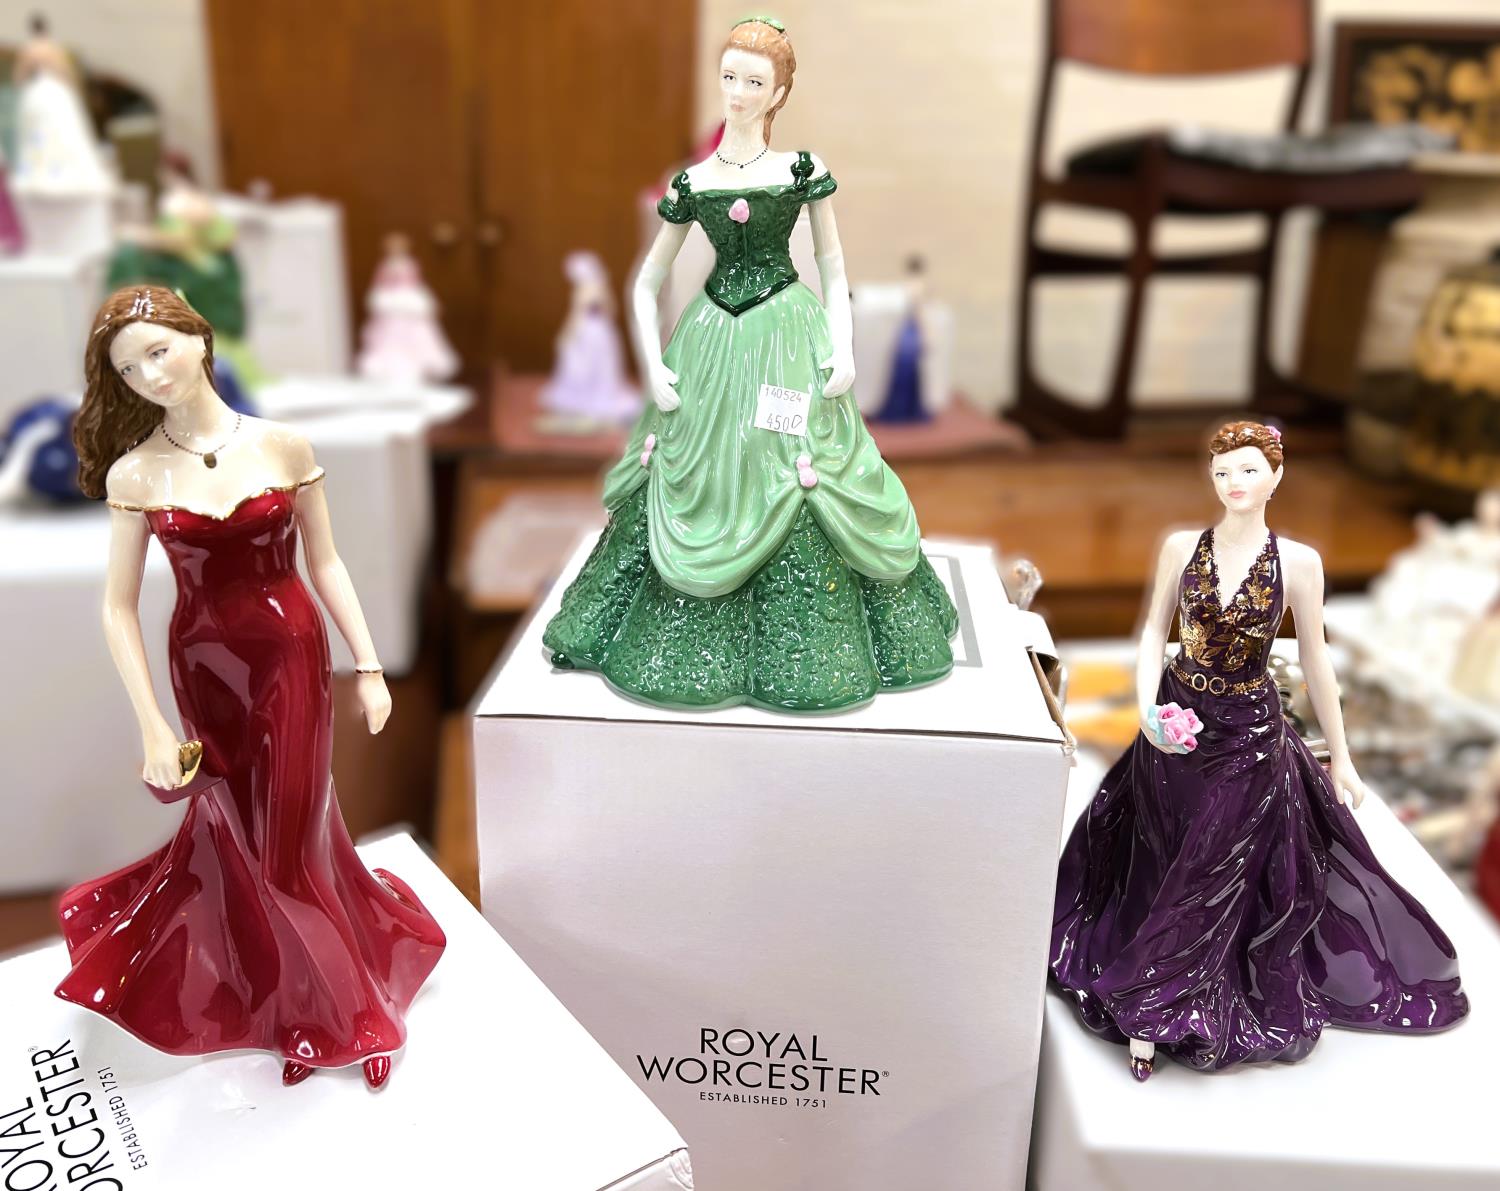 Royal Worcester: Four boxed figurines, 'Juliet' limited to 2007 with certificate, 'Susannah' 2011